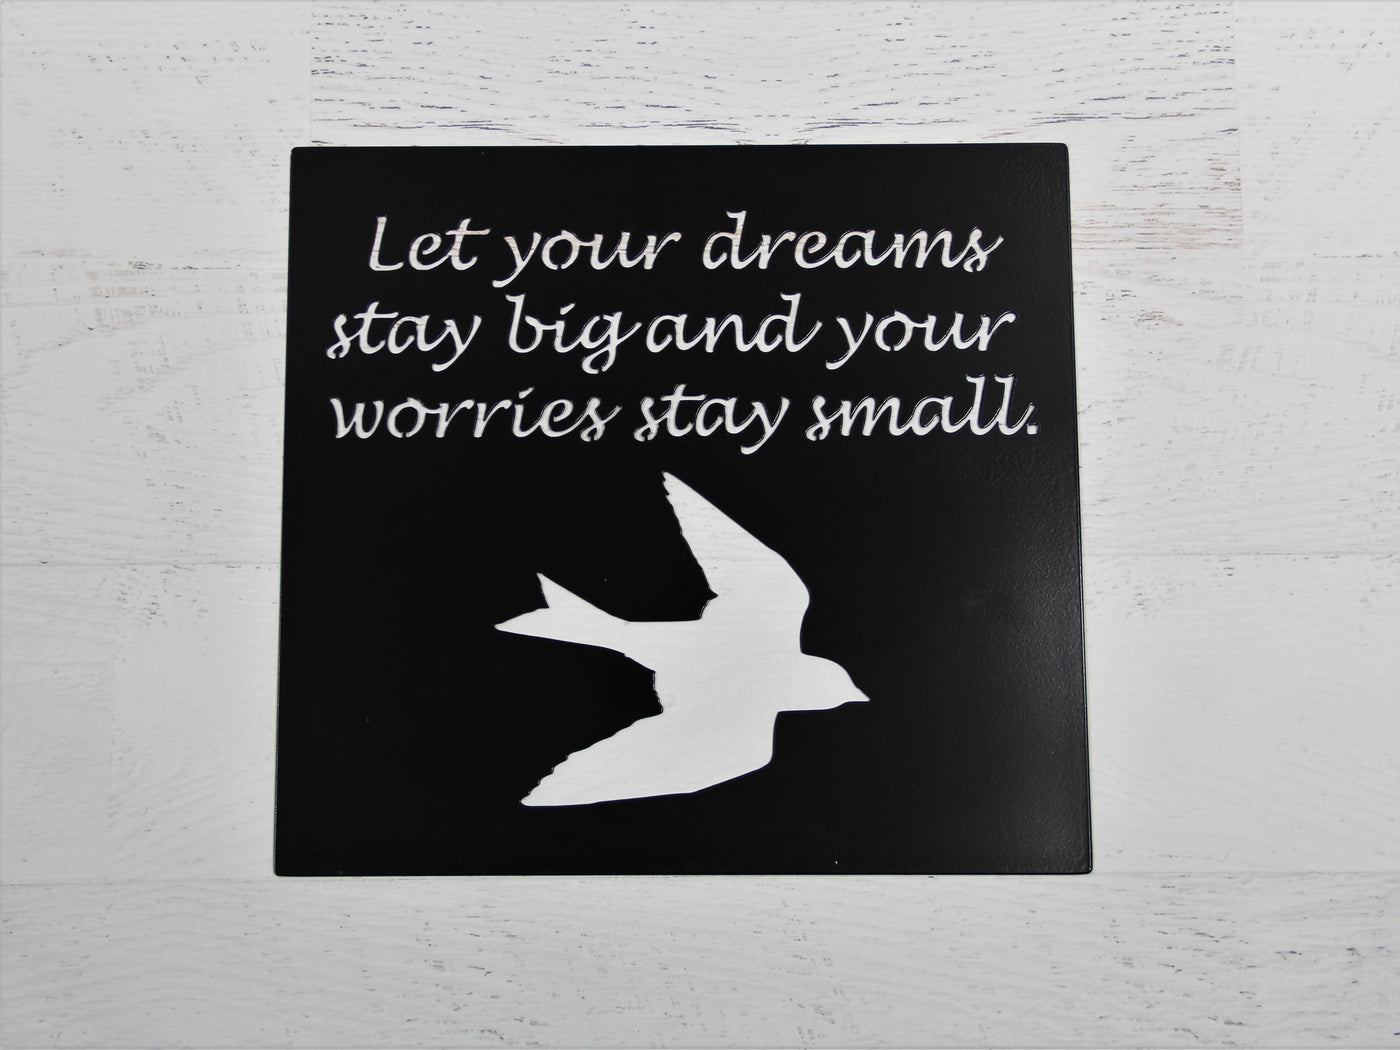 Dreams Stay Big Metal Word Sign - Madison Iron and Wood - Wall Art - metal outdoor decor - Steel deocrations - american made products - veteran owned business products - fencing decorations - fencing supplies - custom wall decorations - personalized wall signs - steel - decorative post caps - steel post caps - metal post caps - brackets - structural brackets - home improvement - easter - easter decorations - easter gift - easter yard decor